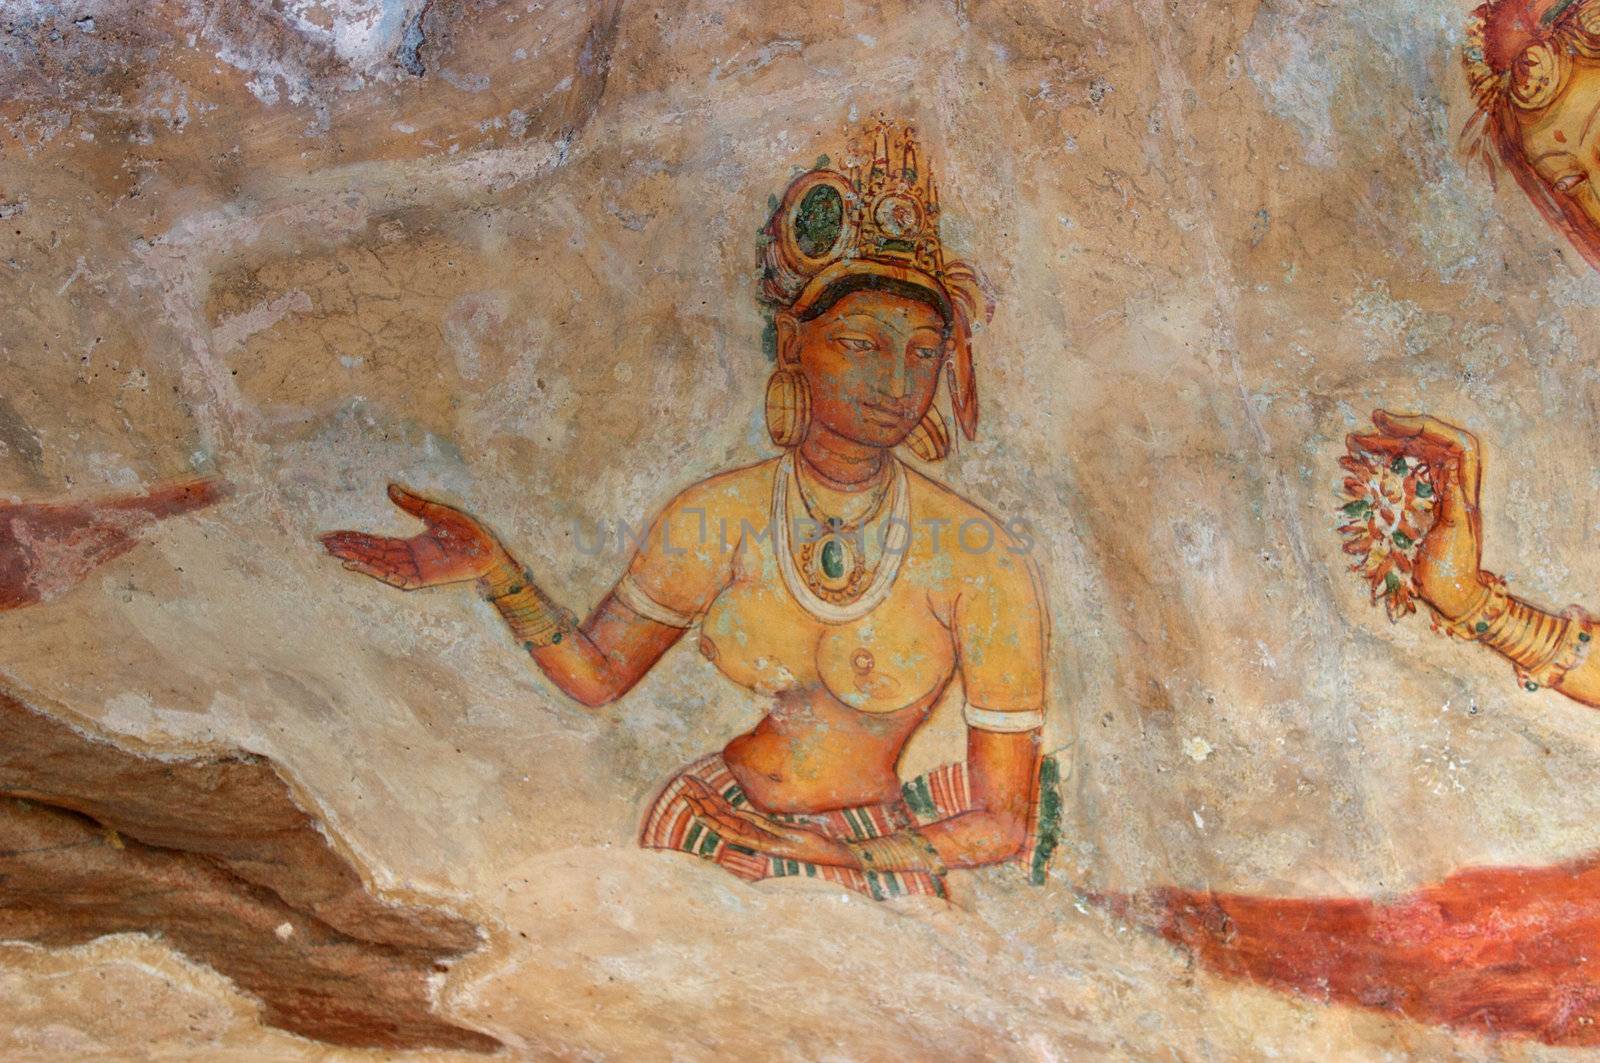 Maiden in the Clouds: one of the 5th century frescoes at the ancient rock fortress of Sigiriya, a UNESCO World Heritage Site in Sri Lanka.